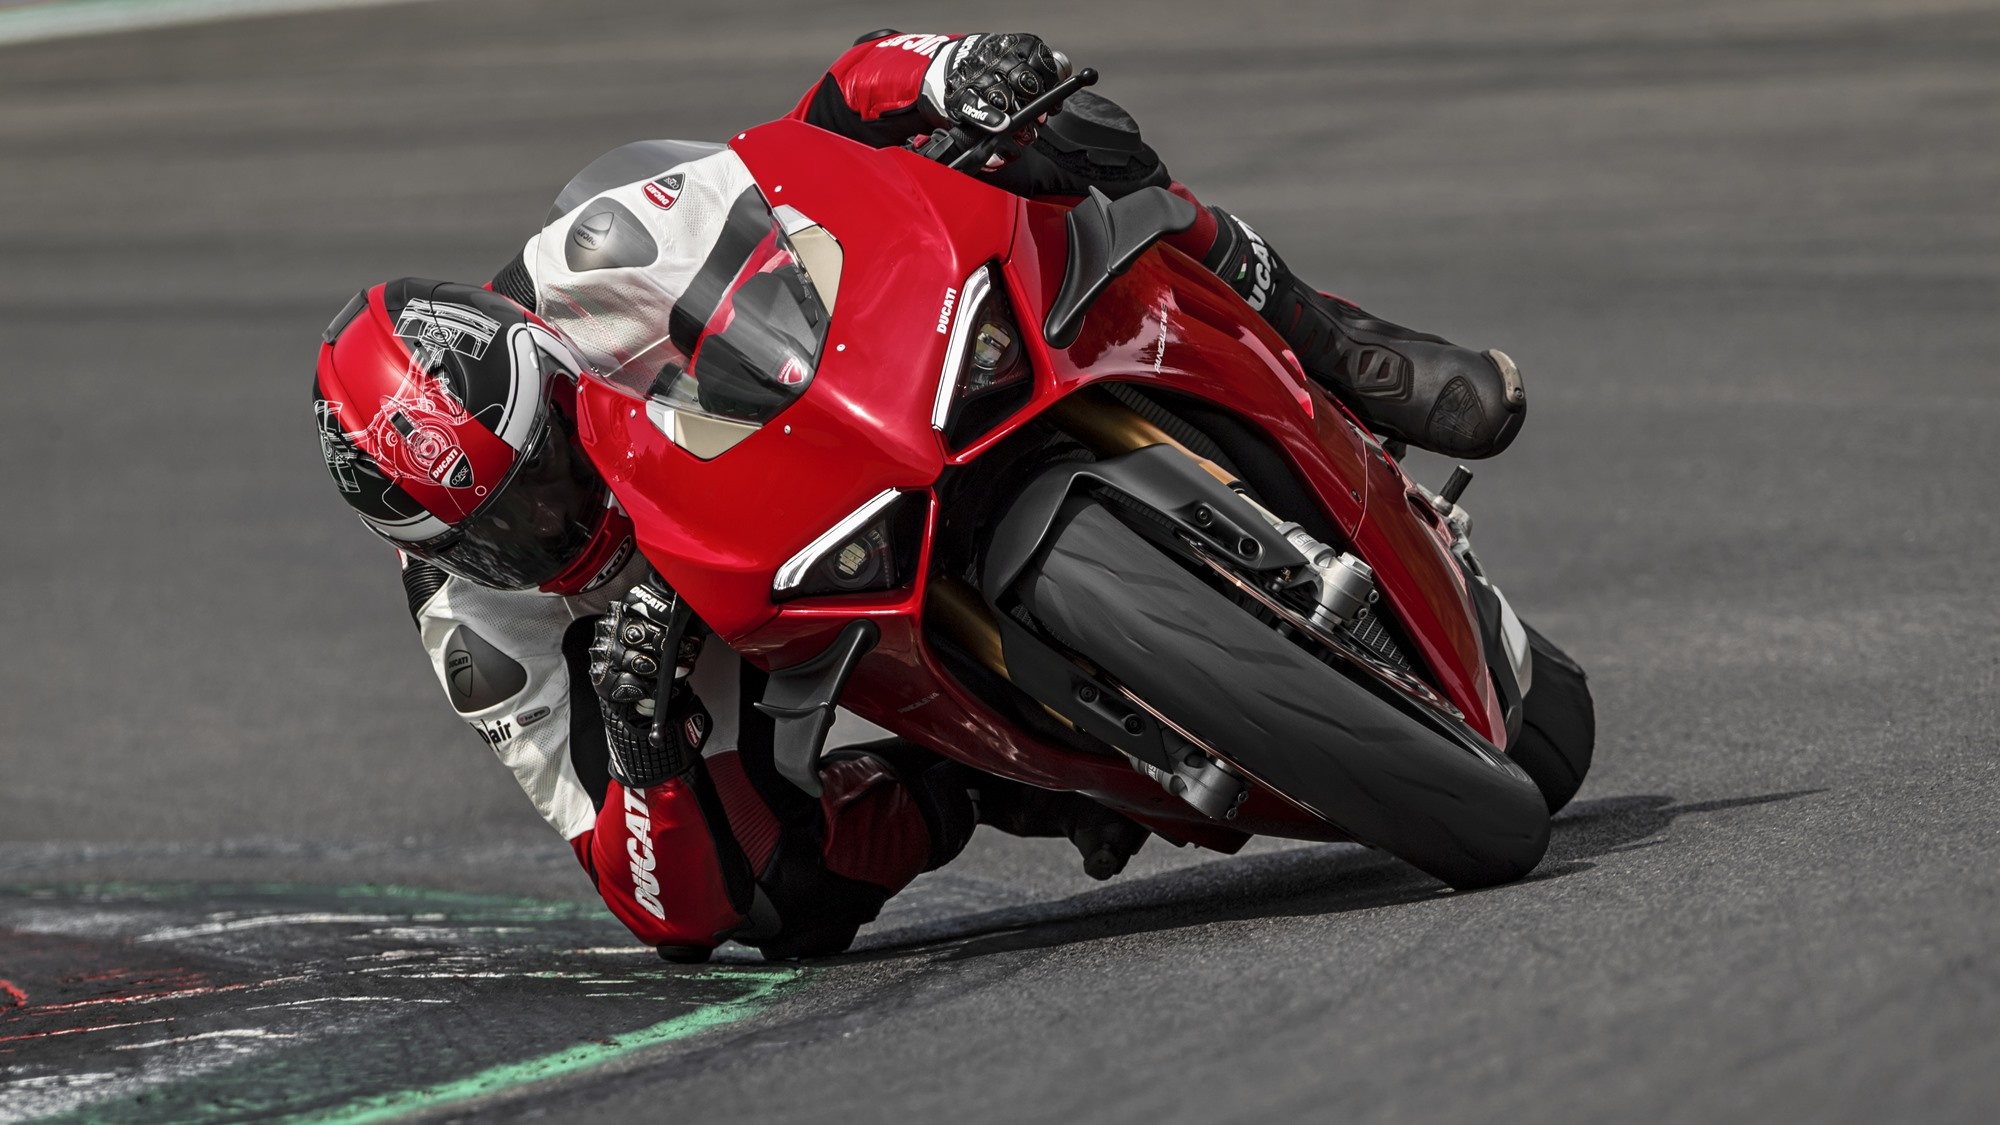 Ducati Panigale V4, High-definition wallpaper, Powerhouse on two wheels, Motorcycling excellence, 2000x1130 HD Desktop